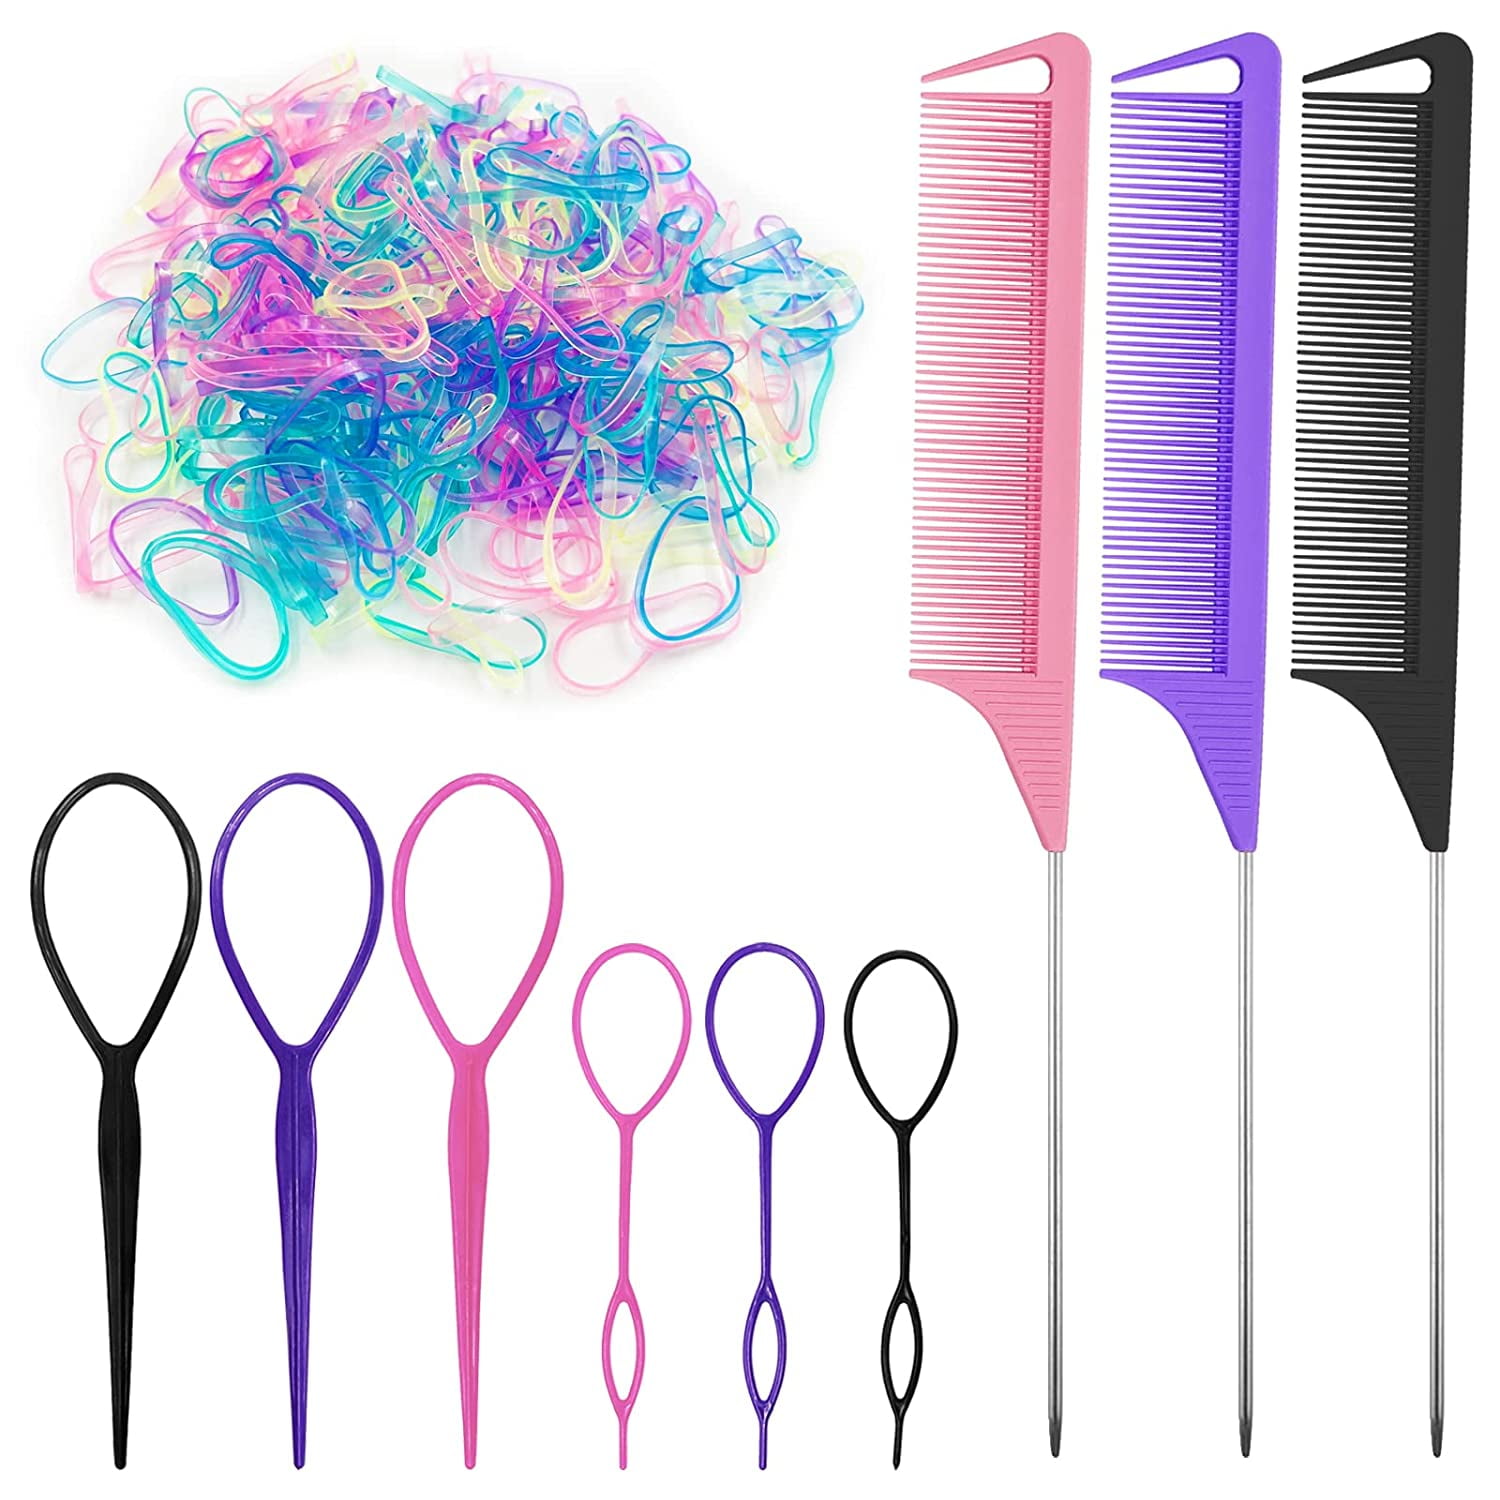 Hair Tail Tools, 9 Pack Hair Loop Tool Set with Mini Small Rubber Bands for  Hair, 6 Pcs Topsy Tail Hair Tools and 3 Pcs Rat Tail Combs Metal Pin Tail